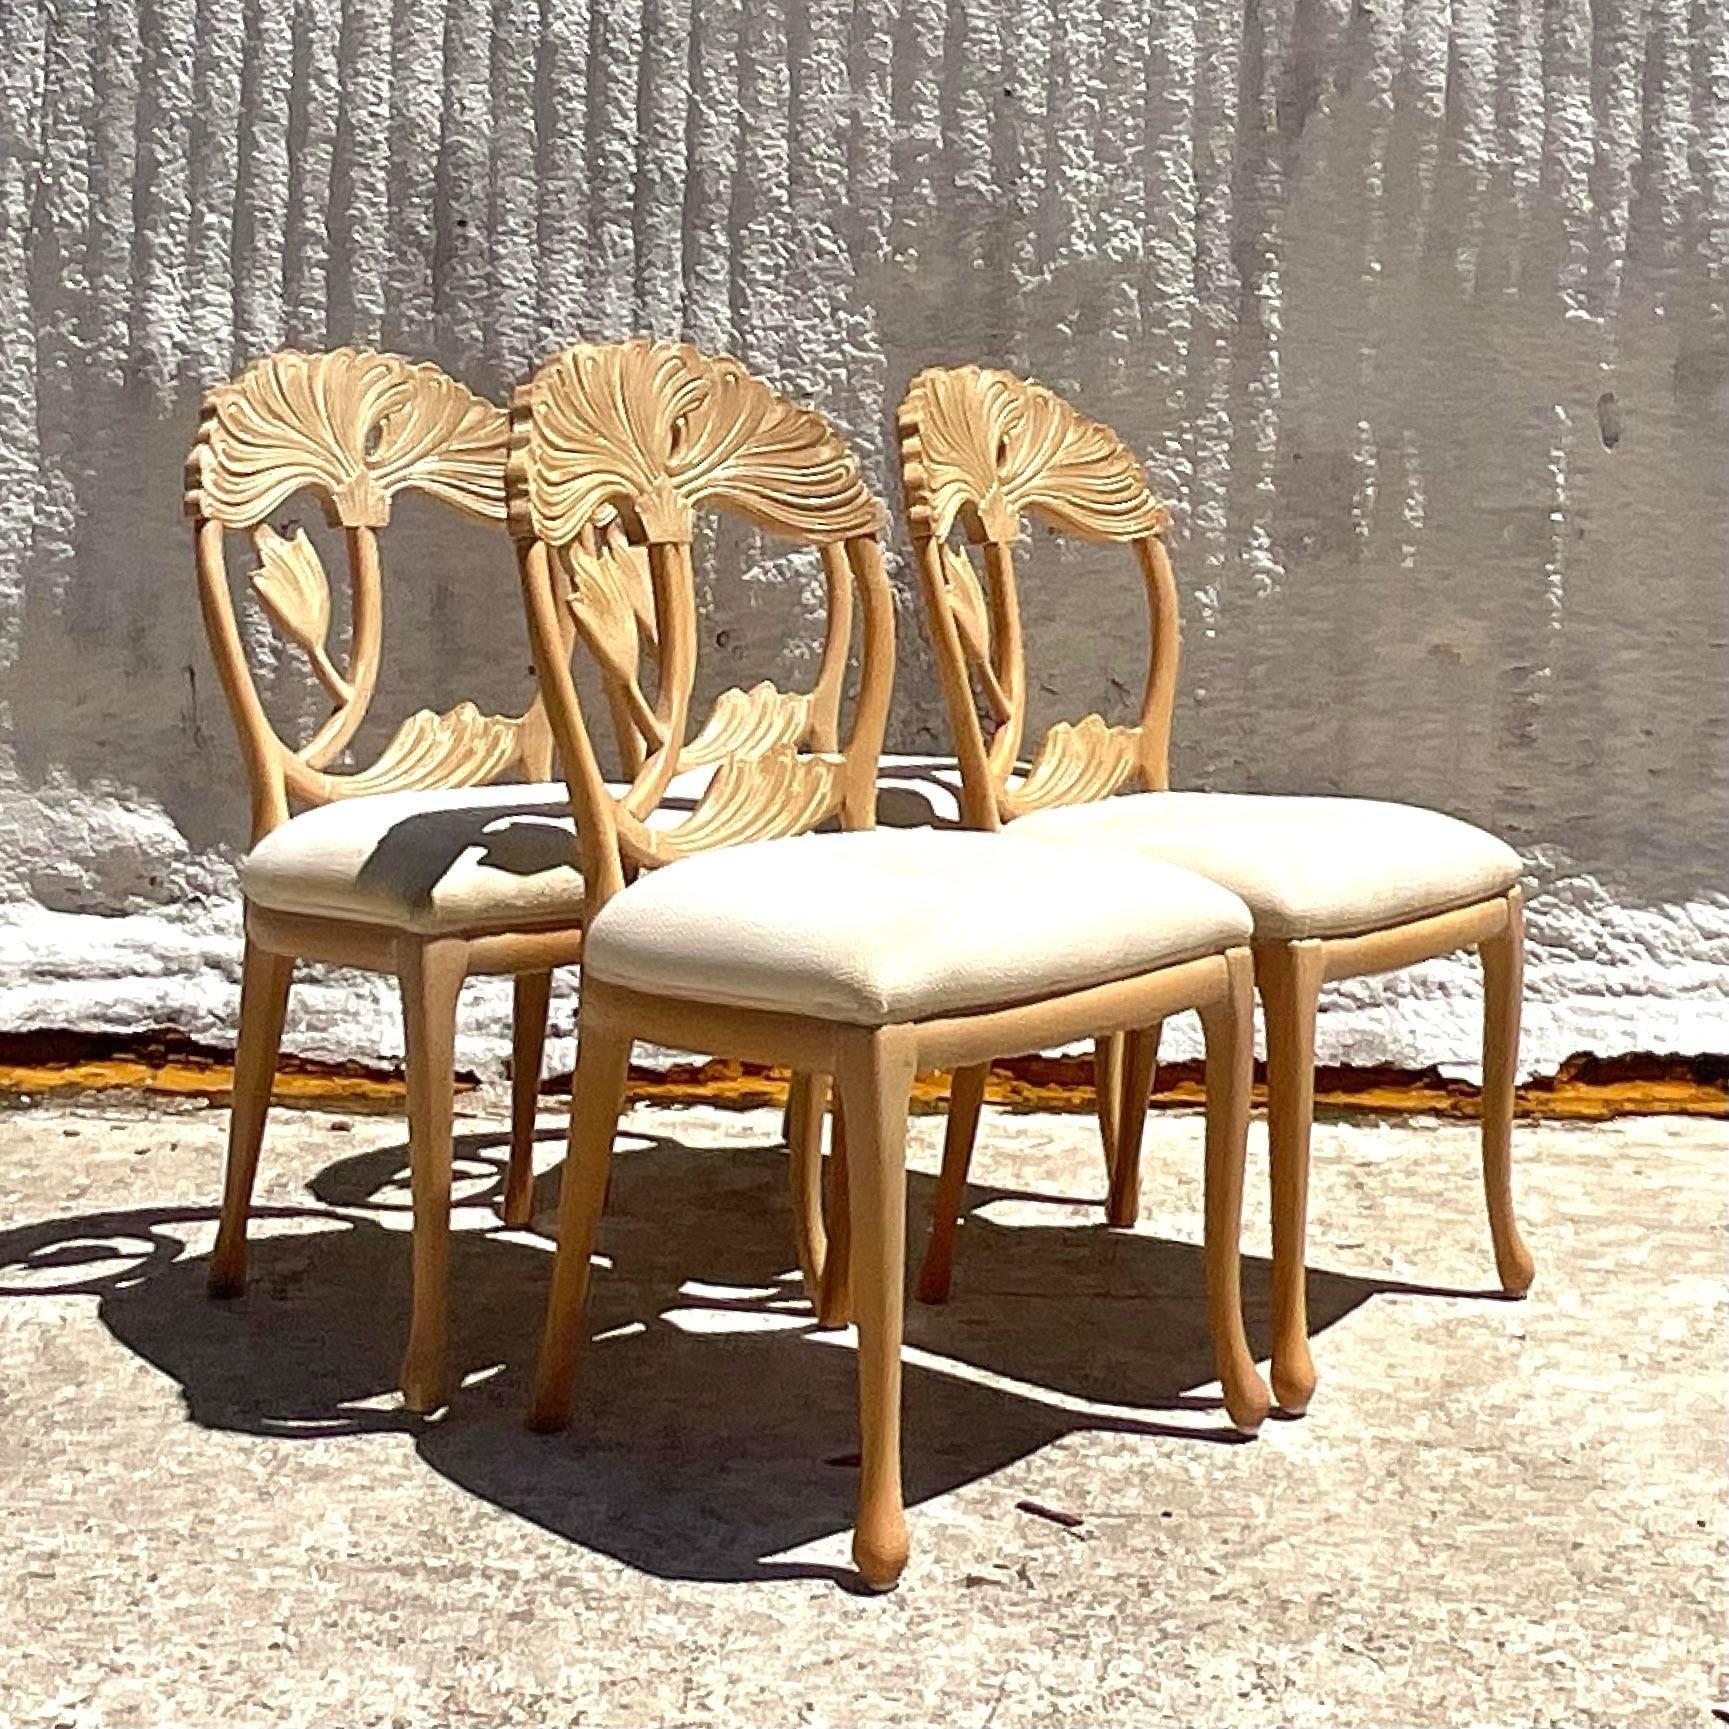 American Vintage Boho Carved Lotus Blossom Dining Chairs - Set of 4